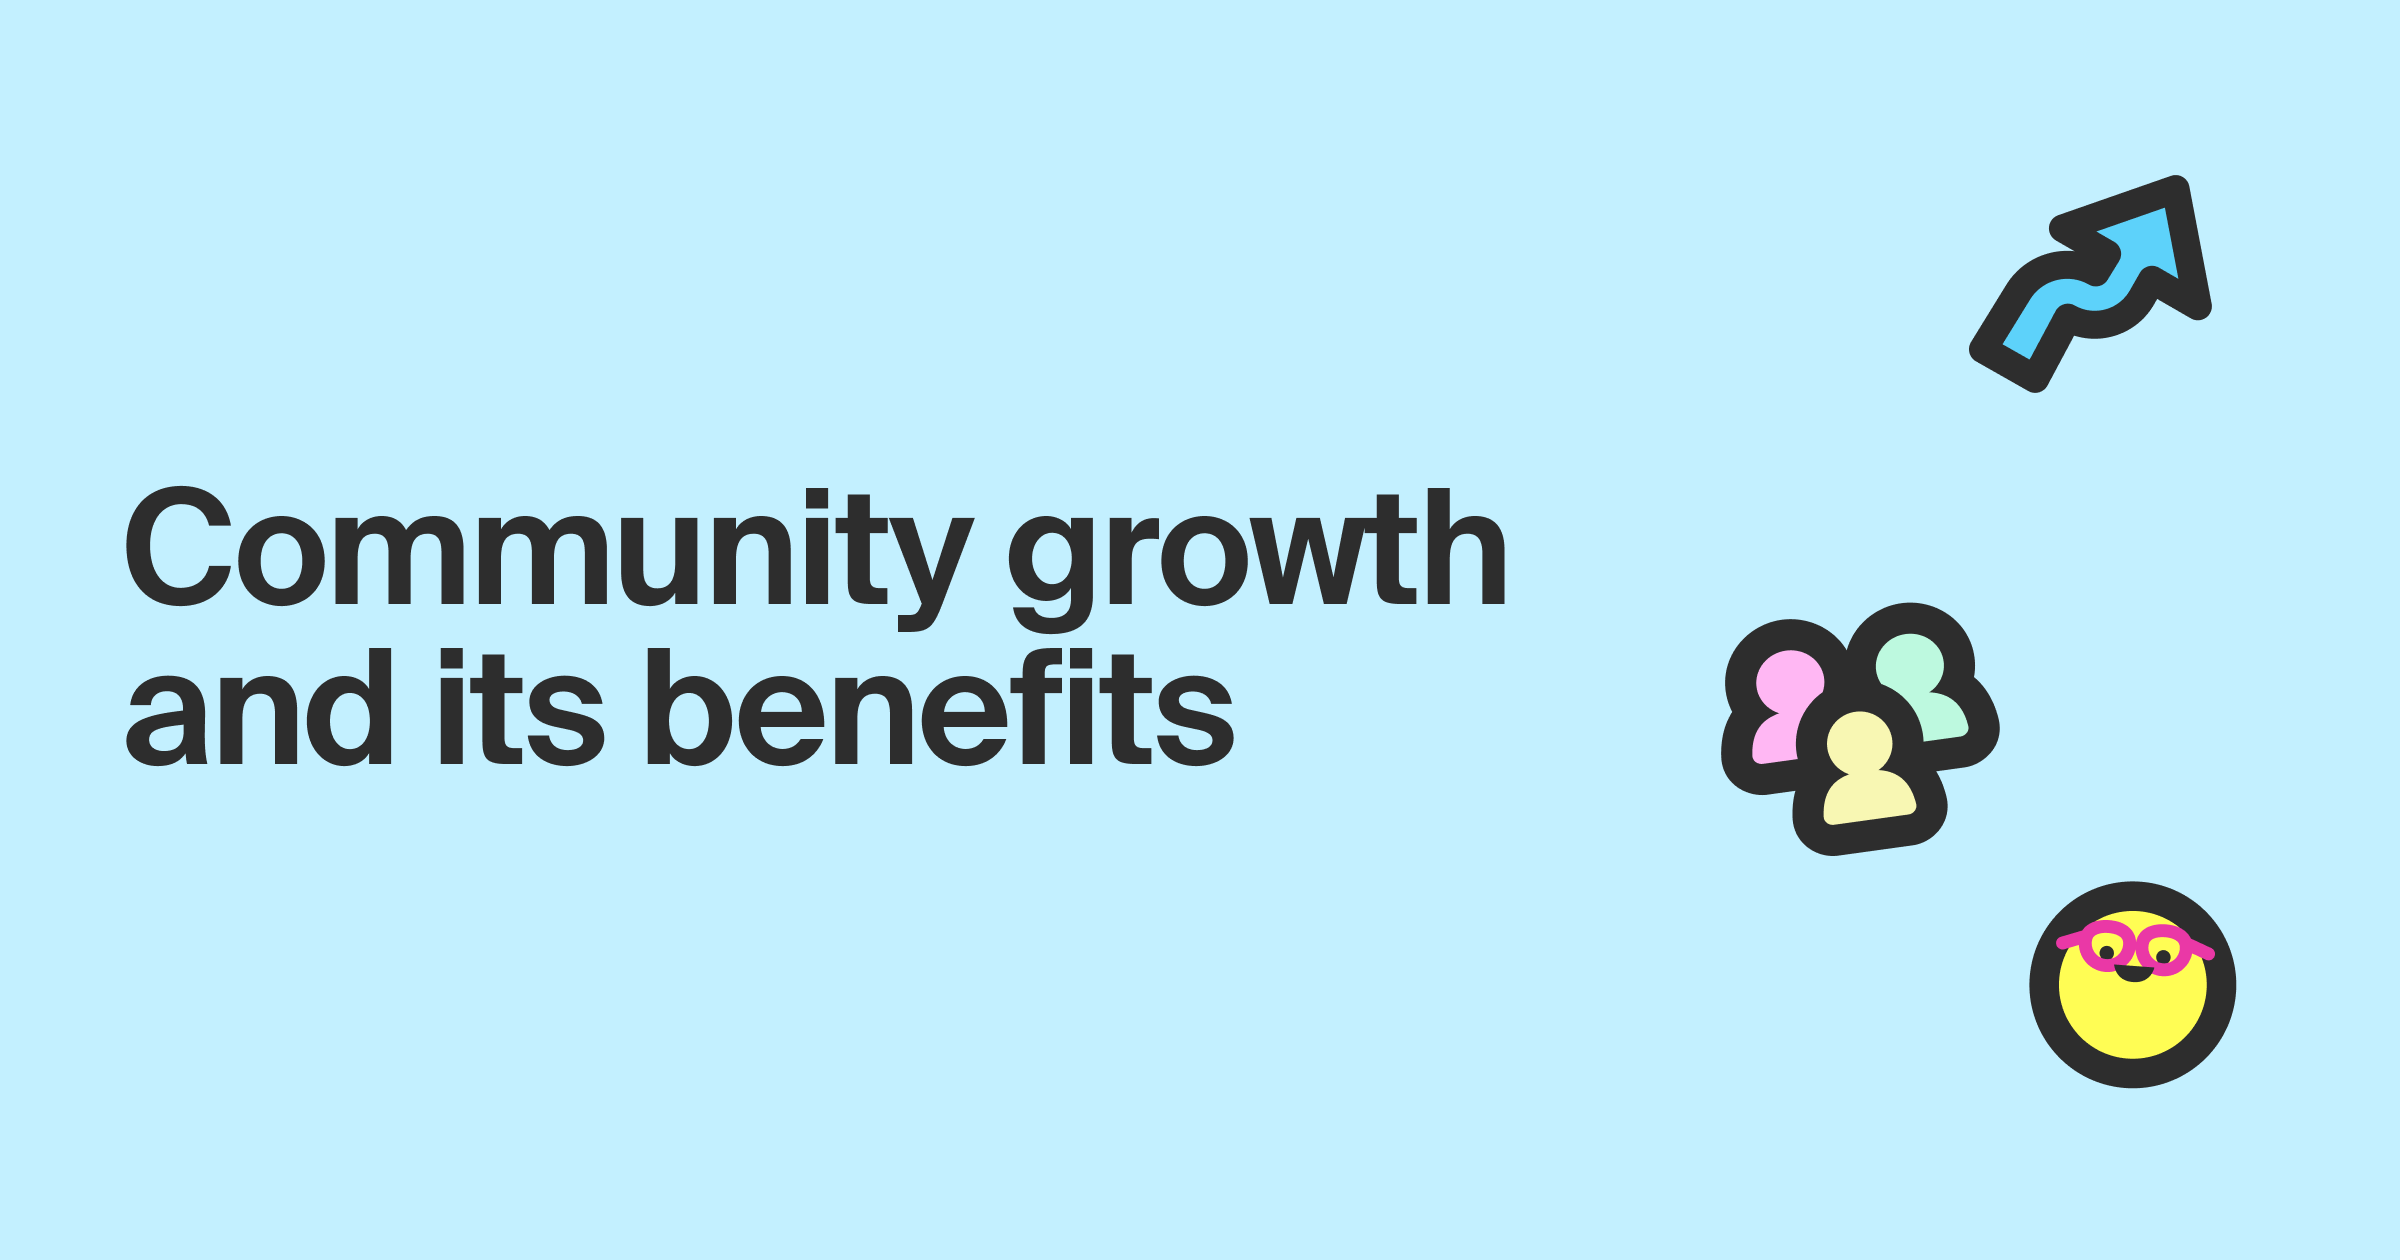 Community growth and its benefits